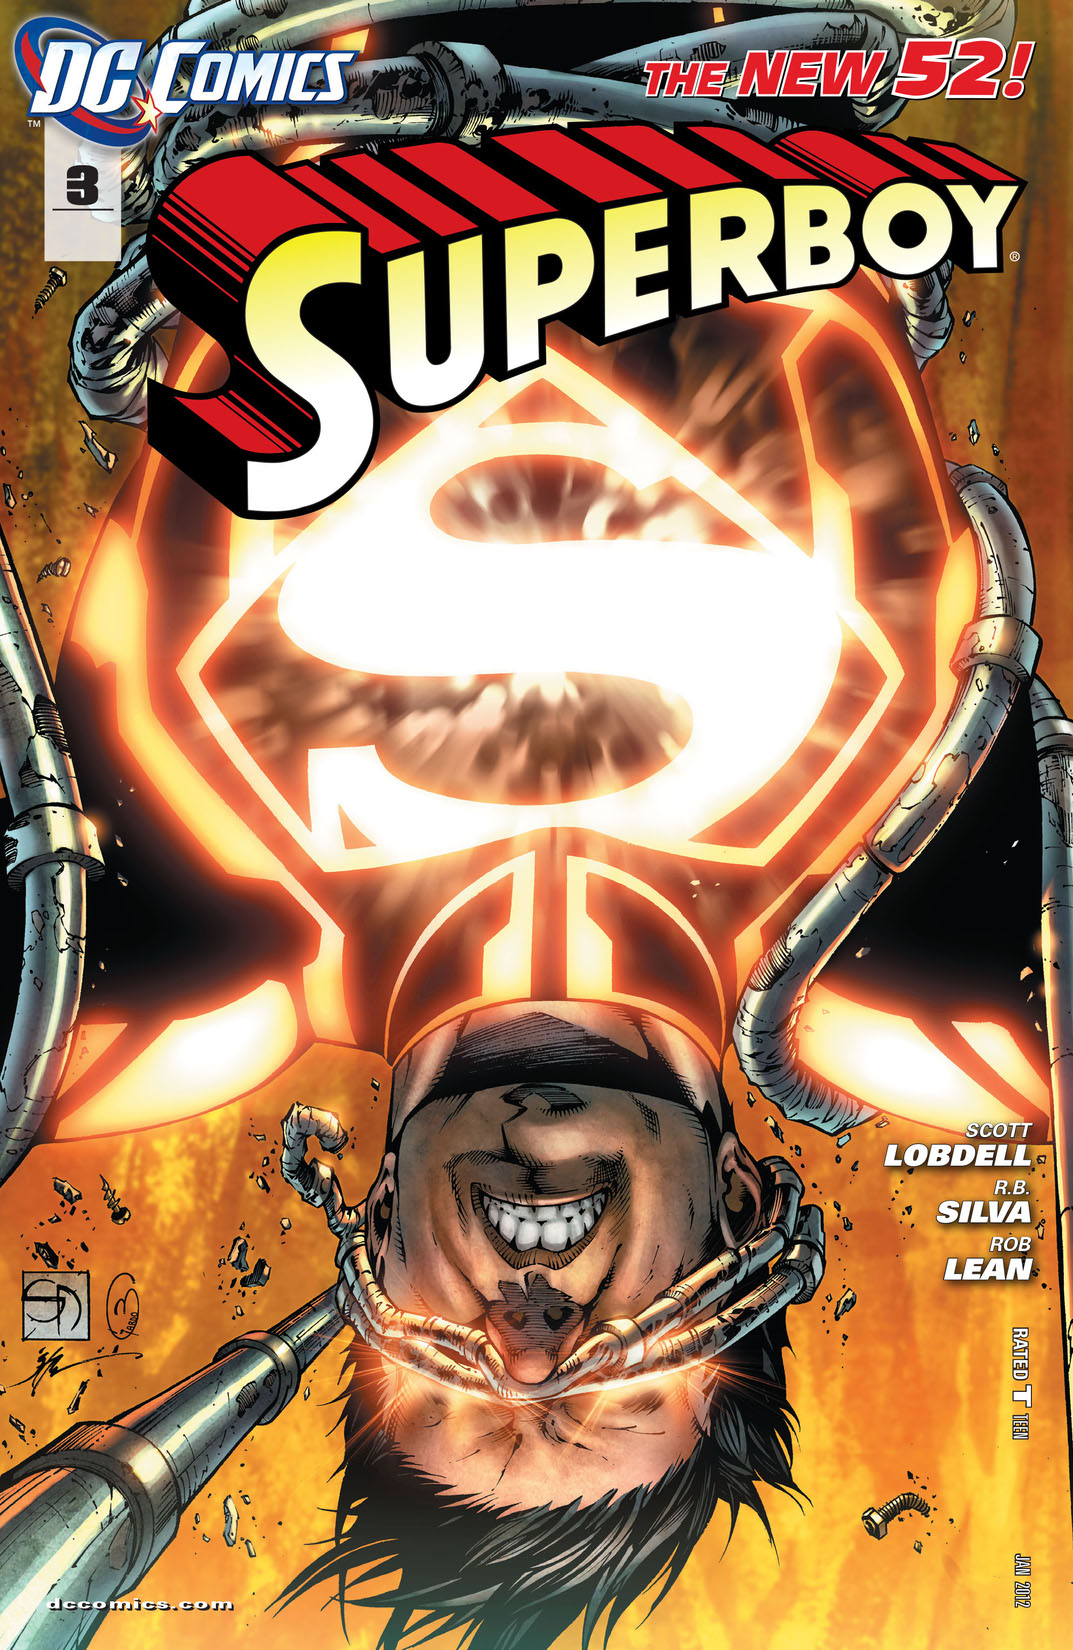 Superboy (2011-) #3 preview images